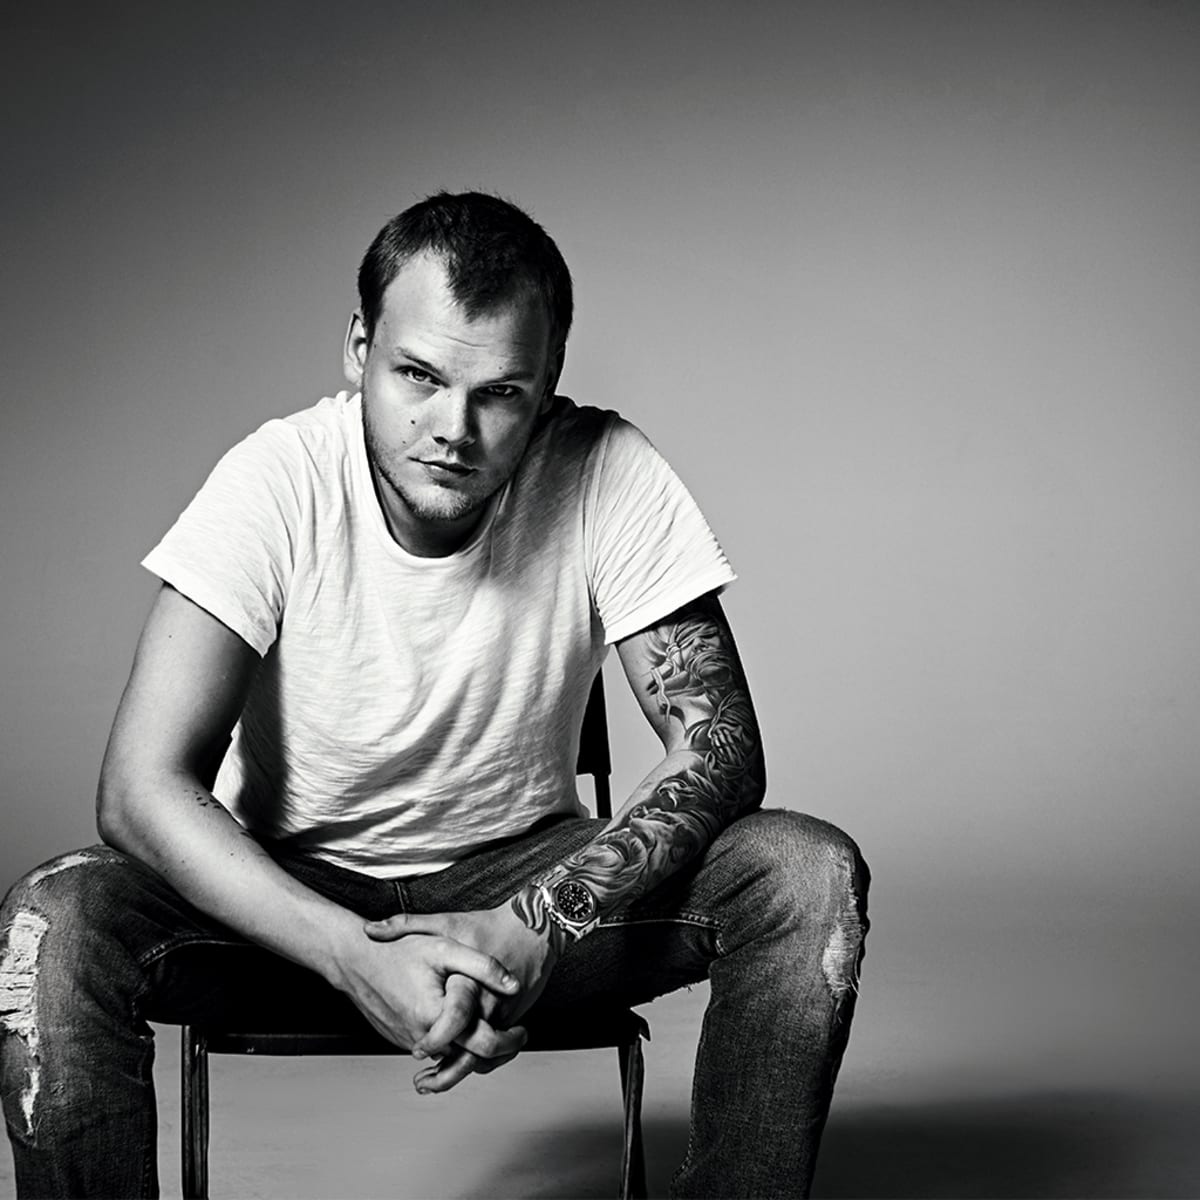 Lyrics Of Unreleased Avicii Songs Highlight His Inner Turmoil Prior To Passing Edm Com The Latest Electronic Dance Music News Reviews Artists